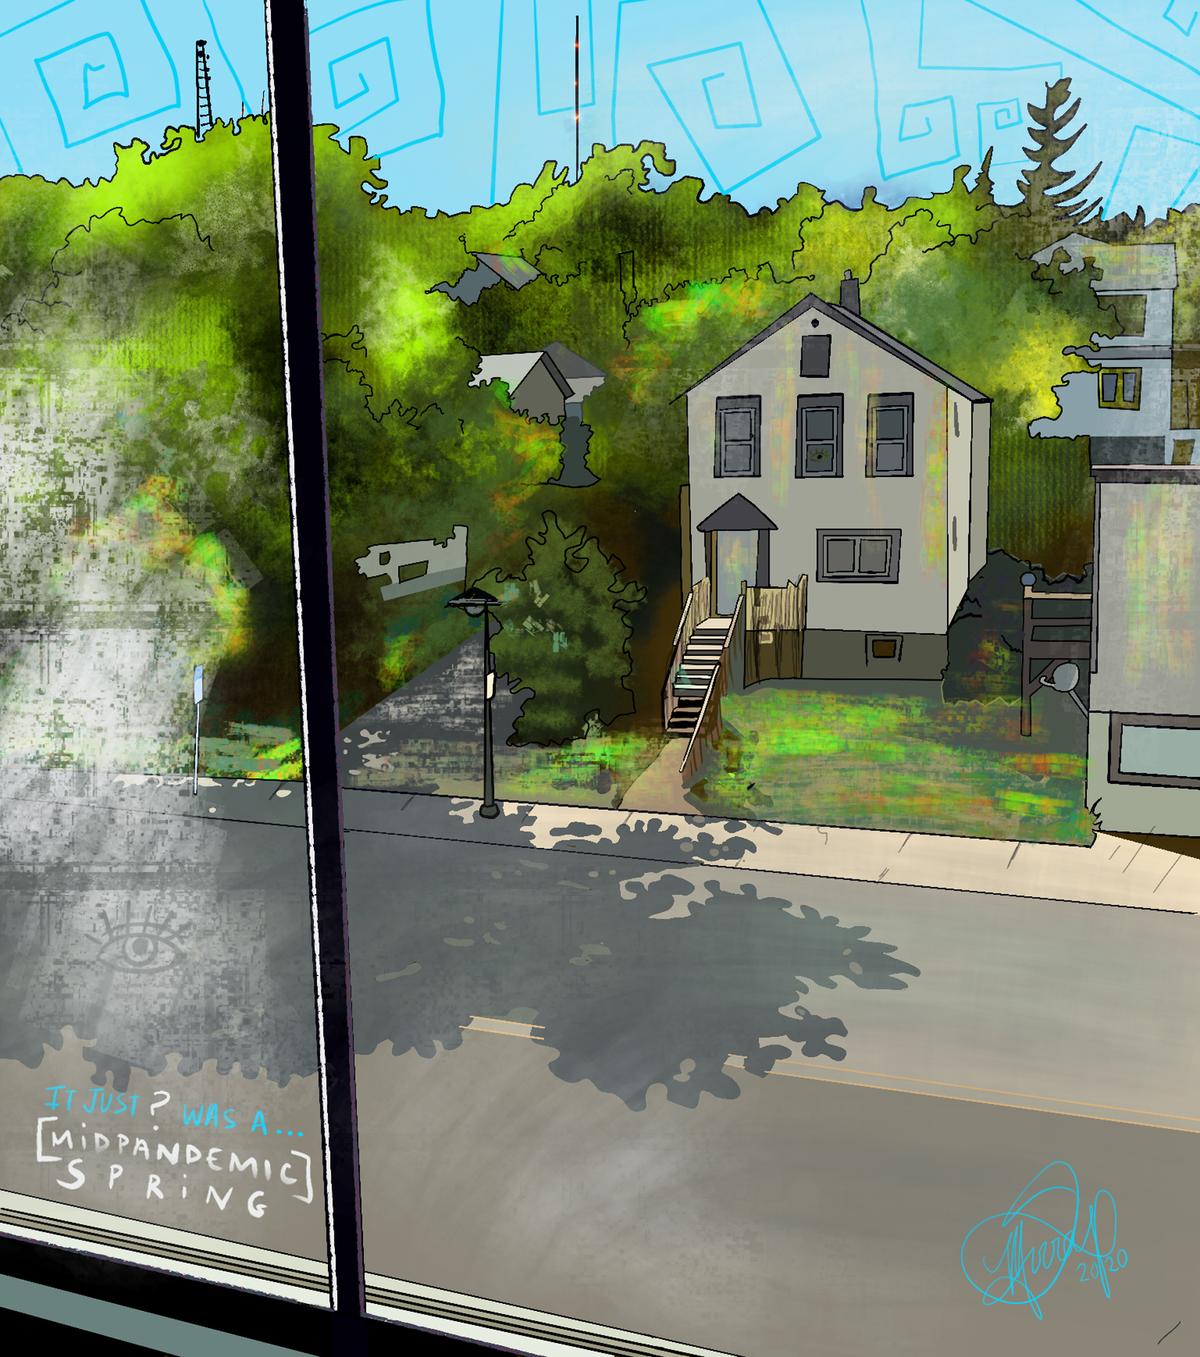 digital illustration of a scene looking through a window to a house across the street with green trees and blue skies